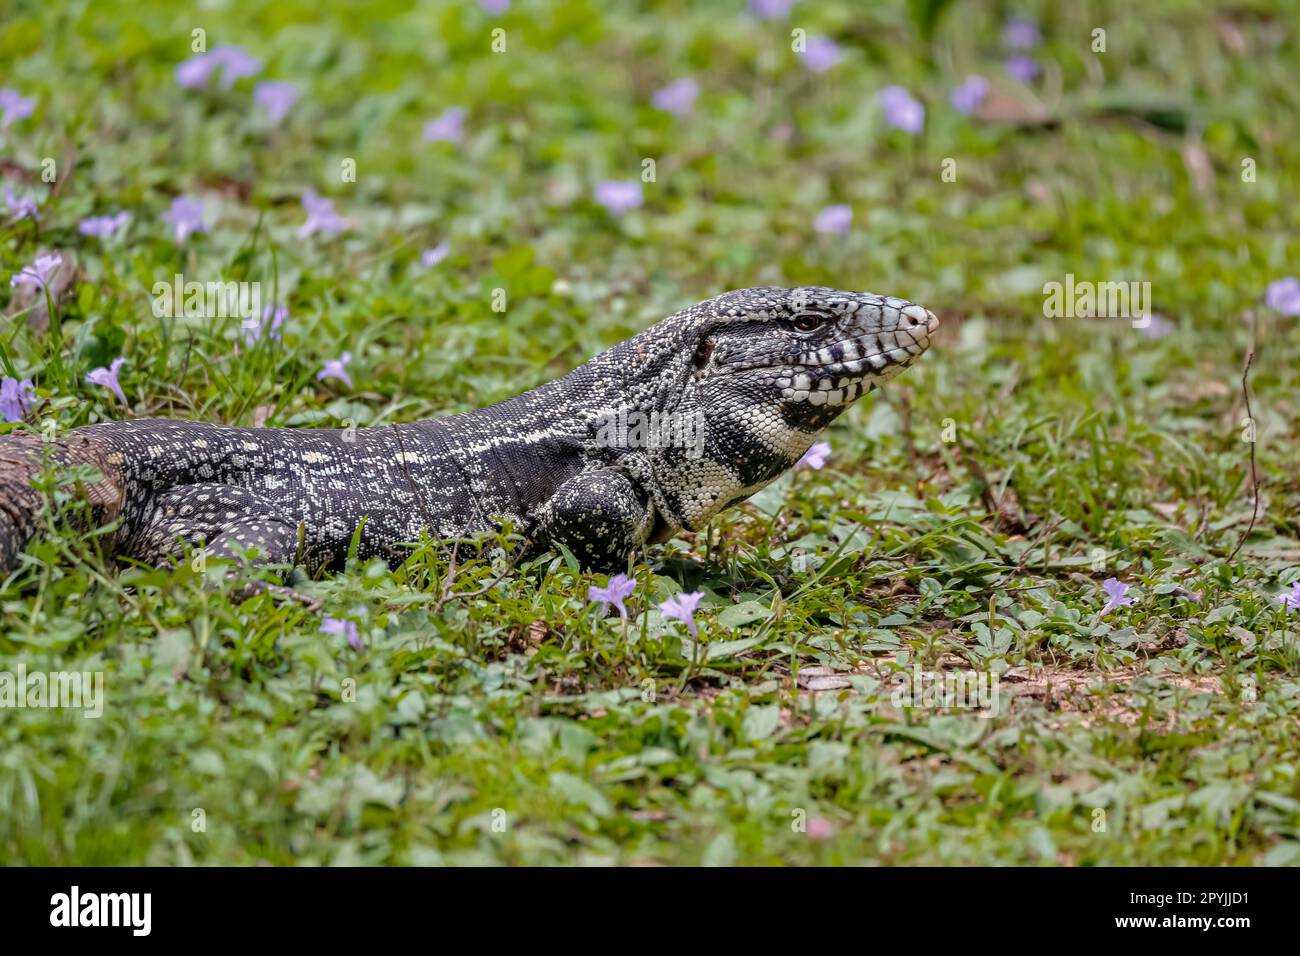 Black and white Tegu sitting in grass, side view, Pantanal Wetlands, Mato Grosso, Brazil Stock Photo